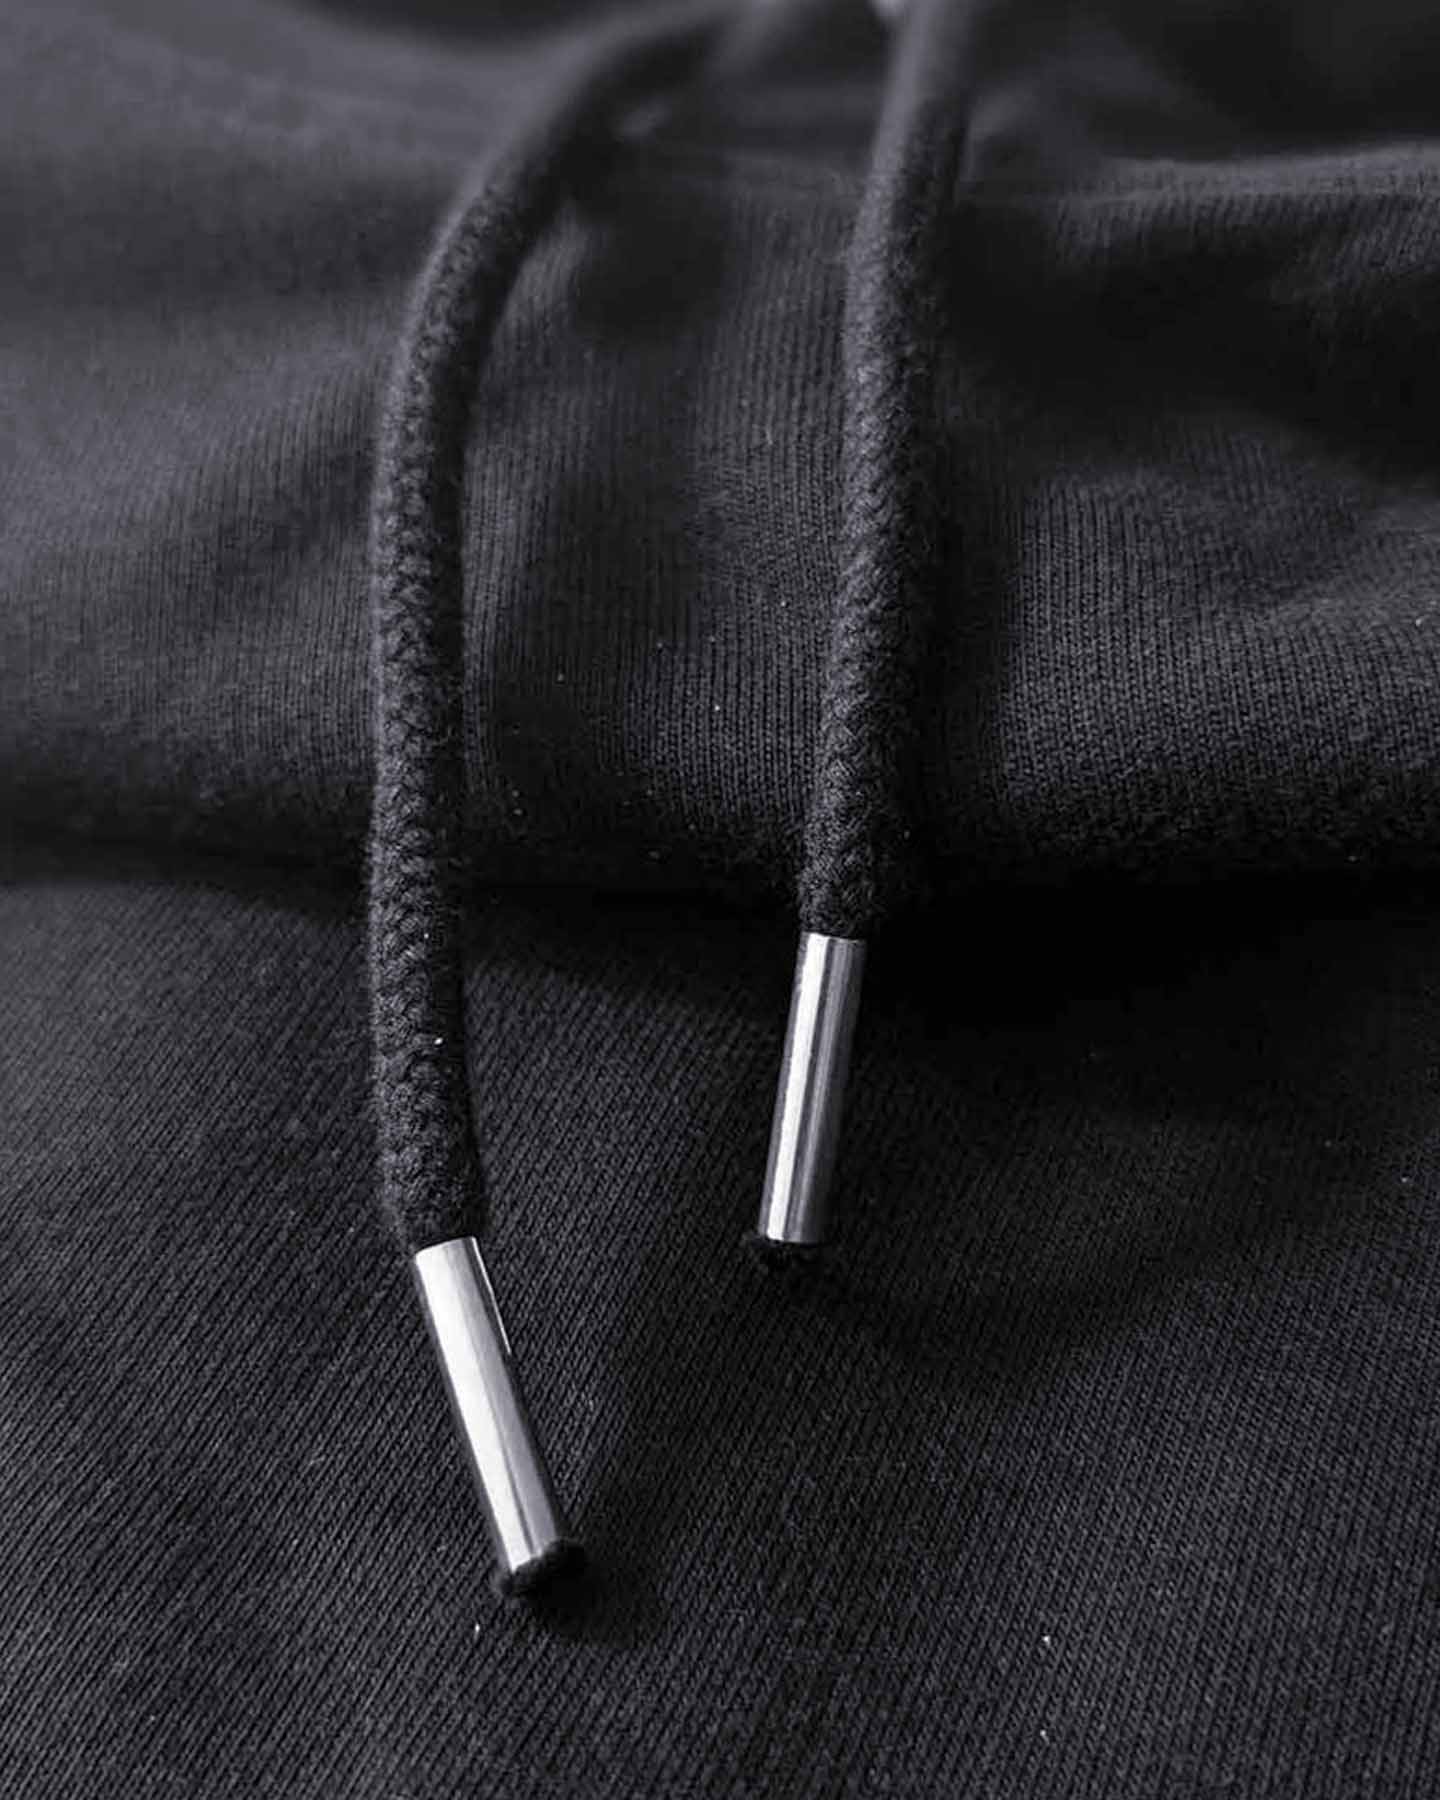 Macro shot of a black hoodie's drawstrings showing the detail and the quality